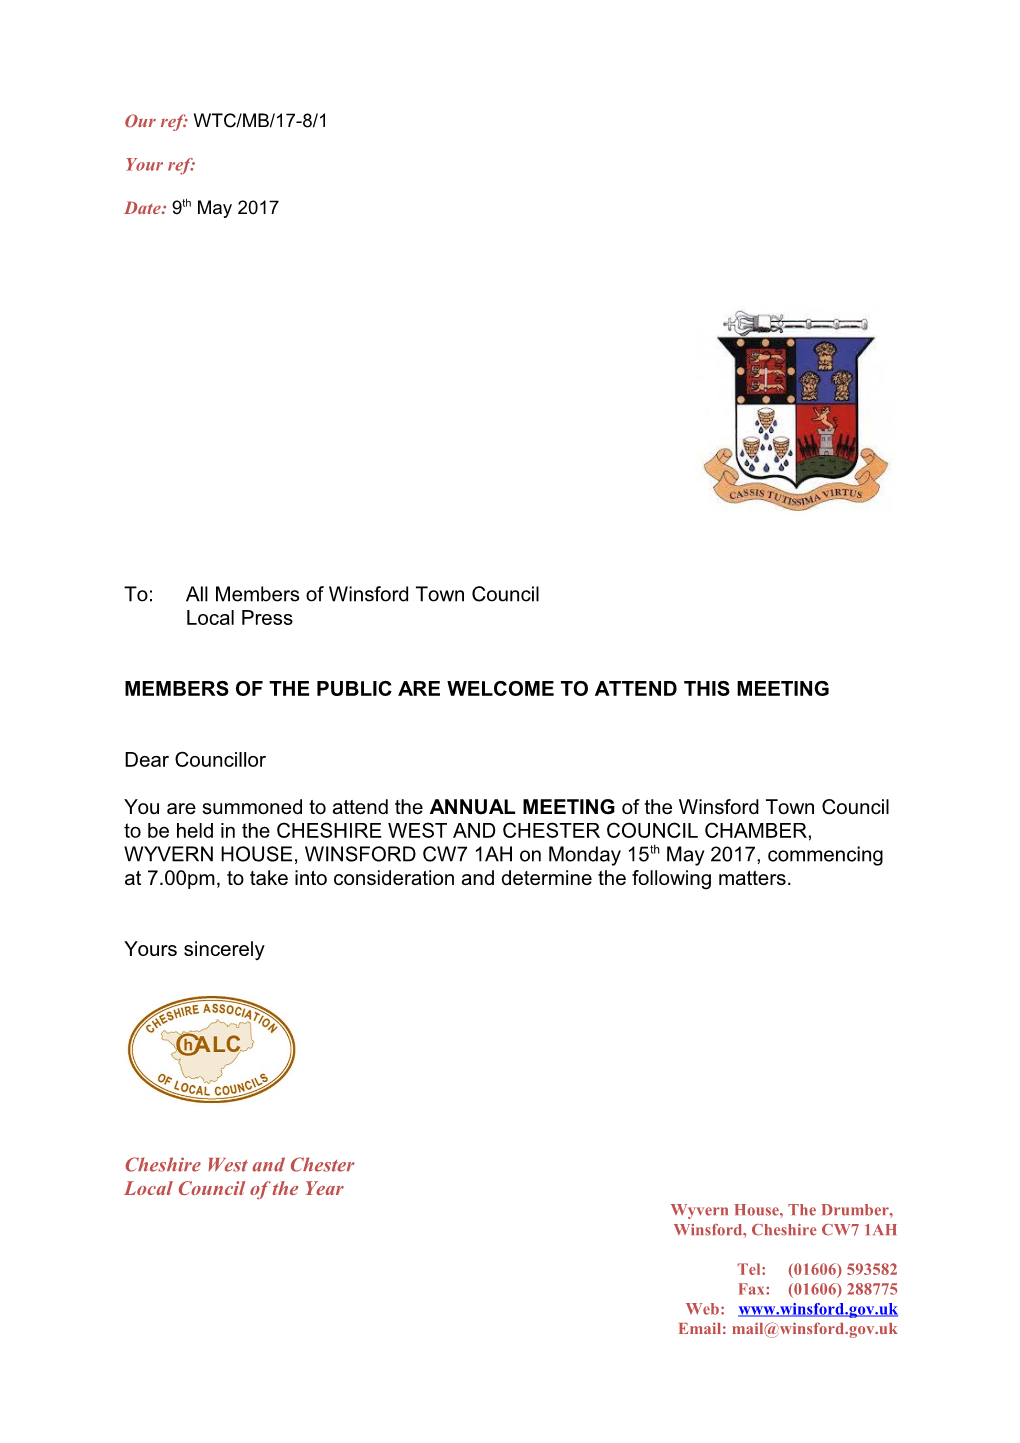 Members of the Public Are Welcome to Attend This Meeting s1